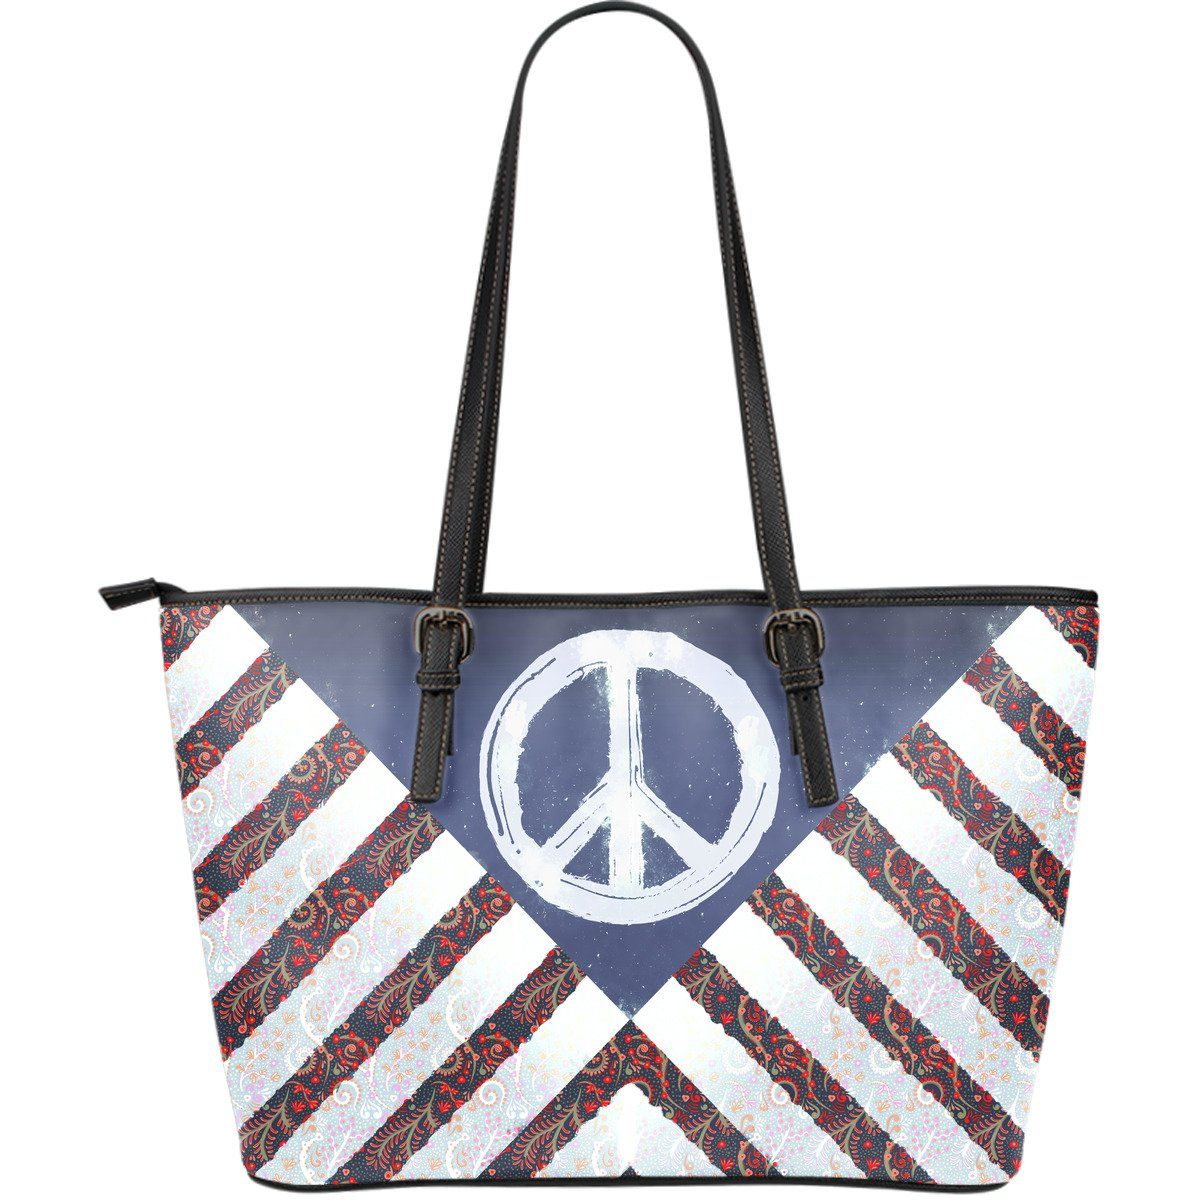 Hippie State - Big artificial leather bag